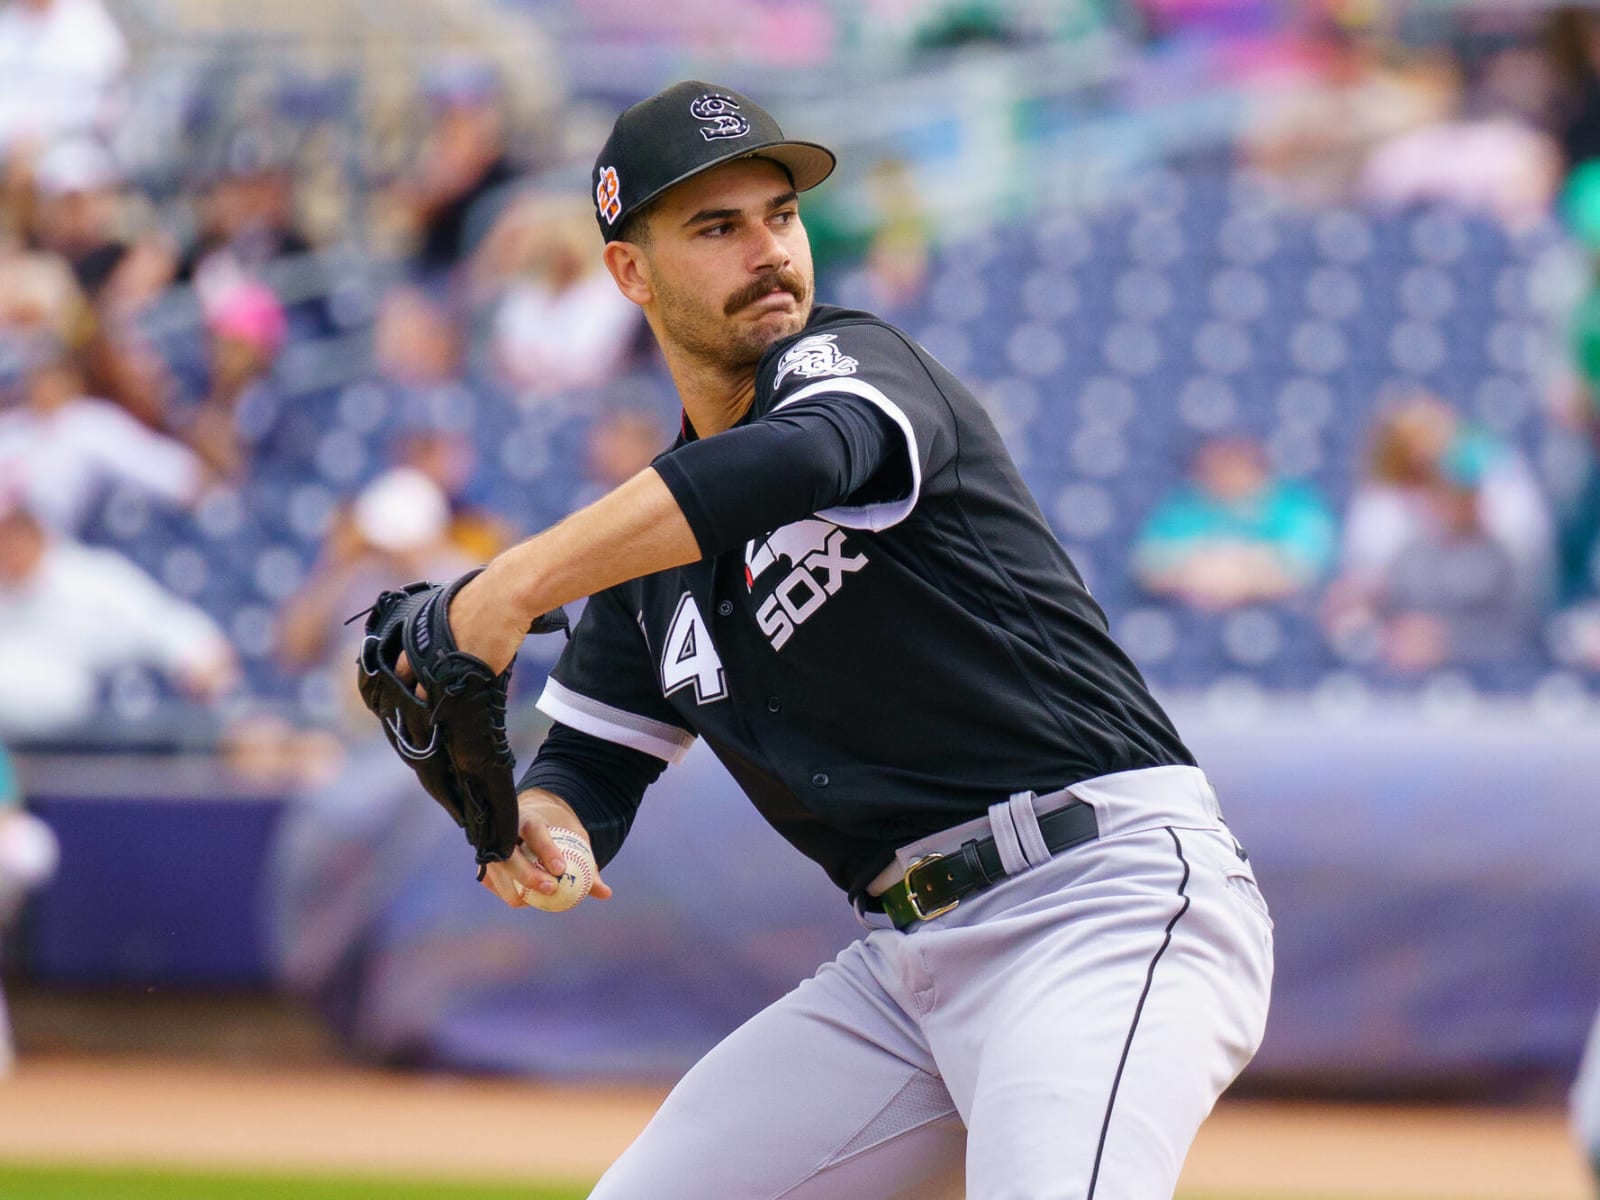 Headed by Cease, White Sox's starting rotation shapes up as a strength